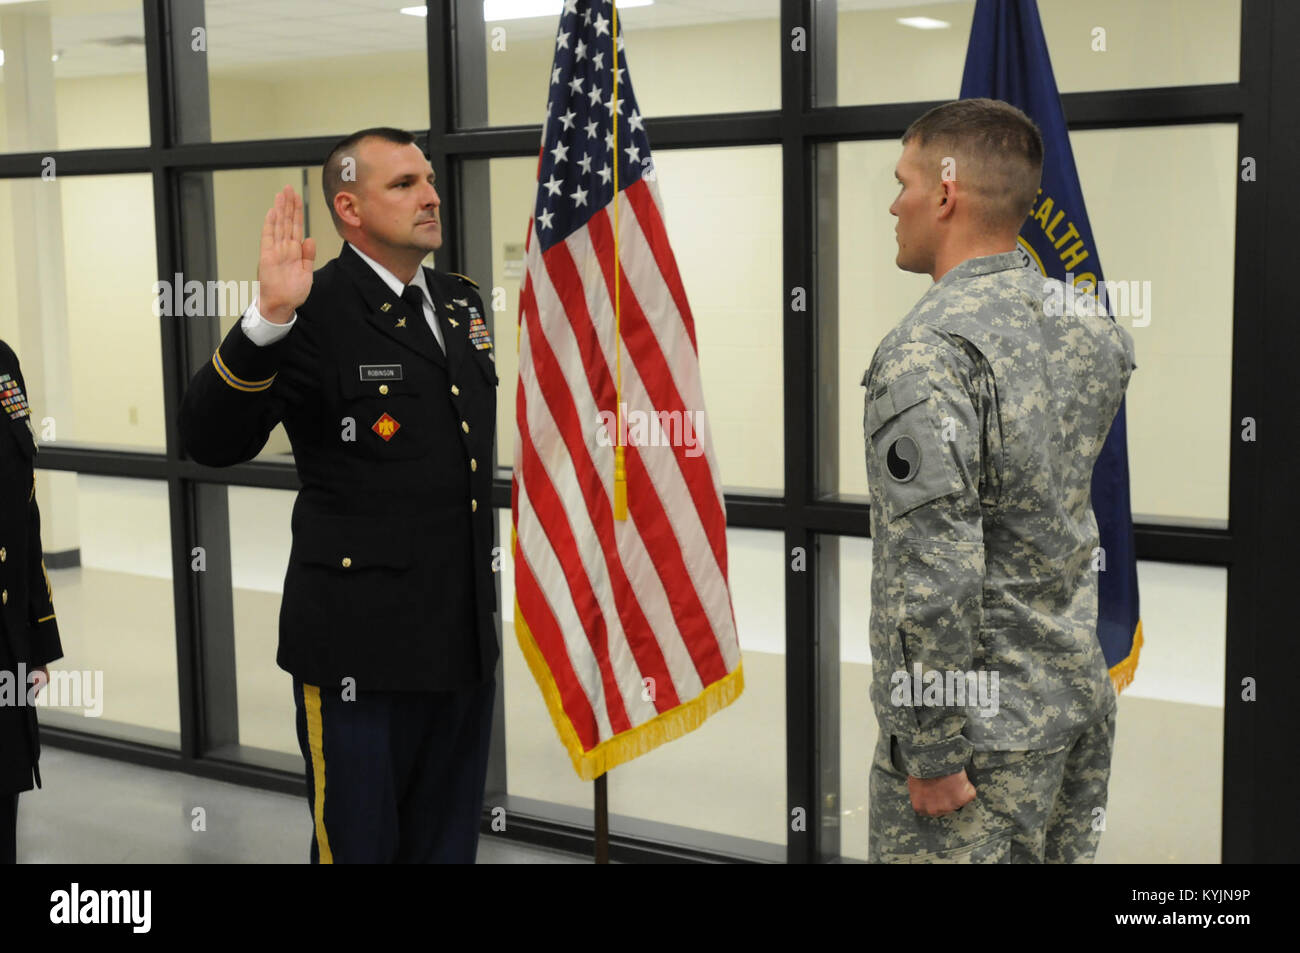 Spc. Daniel Burkemeir of the 1204th Aviation Support Battalion re-enlists in the Kentucky National Guard with the help of unit commander, Maj. Phillip Robinson, May 10, 2013, in Burlington, Ky. (U.S. Army National Guard photo by Staff Sgt. Scott Raymond) Stock Photo